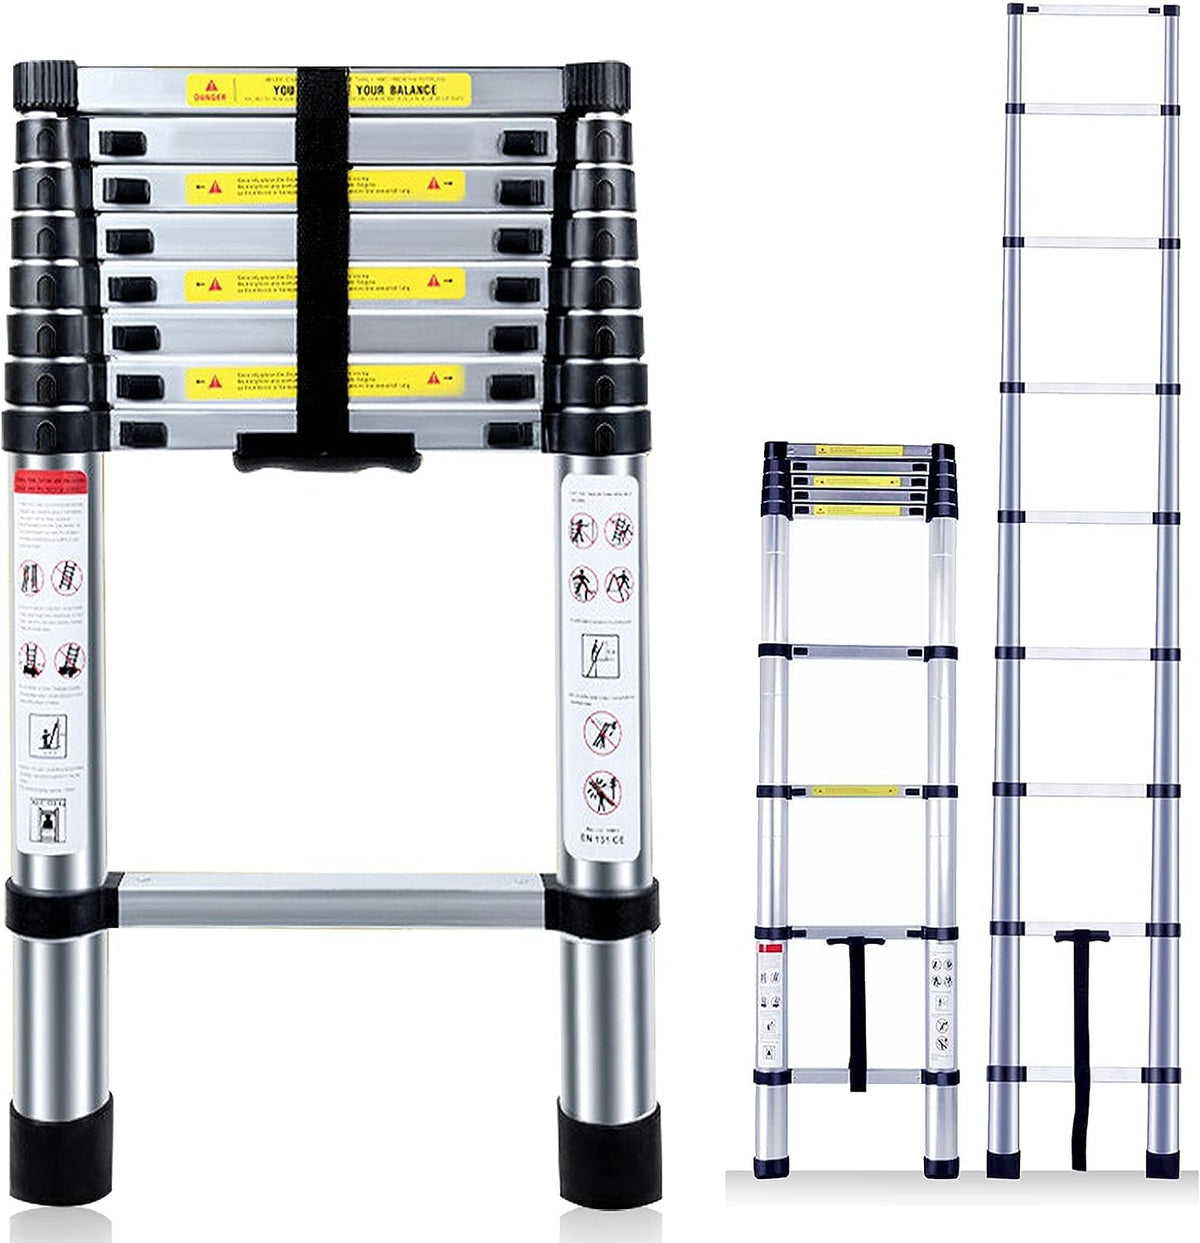 KriShyam® Telescopic Ladder, 3.4M/11ft Stainless Steel Lightweight Telescoping Ladders, Multi-Purpose Extension Ladder for Indoor or Outdoor Working, 150Kg Capacity (3.4M/11ft Stainless Steel)